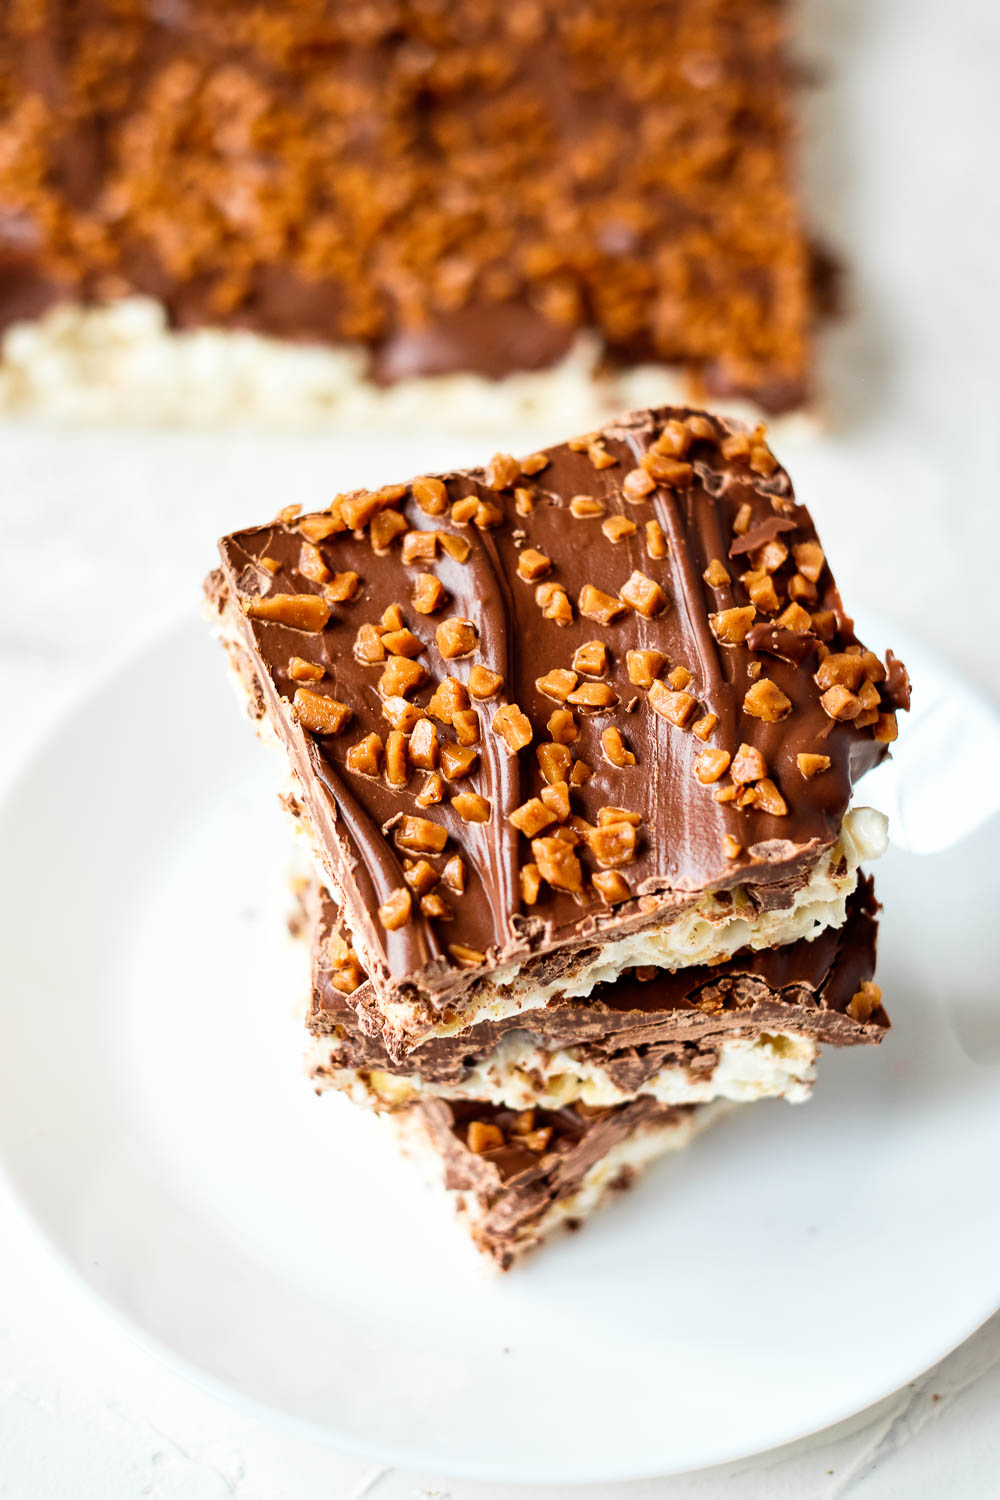 Forget the hassle of popcorn balls; these homemade no-bake chocolate chip popcorn bars are crowd-pleasing, easy to put together, and taste just fabulous without all the fuss! As added bonus, they’re customizable and you’ll end up with a ridiculously tasty treat.